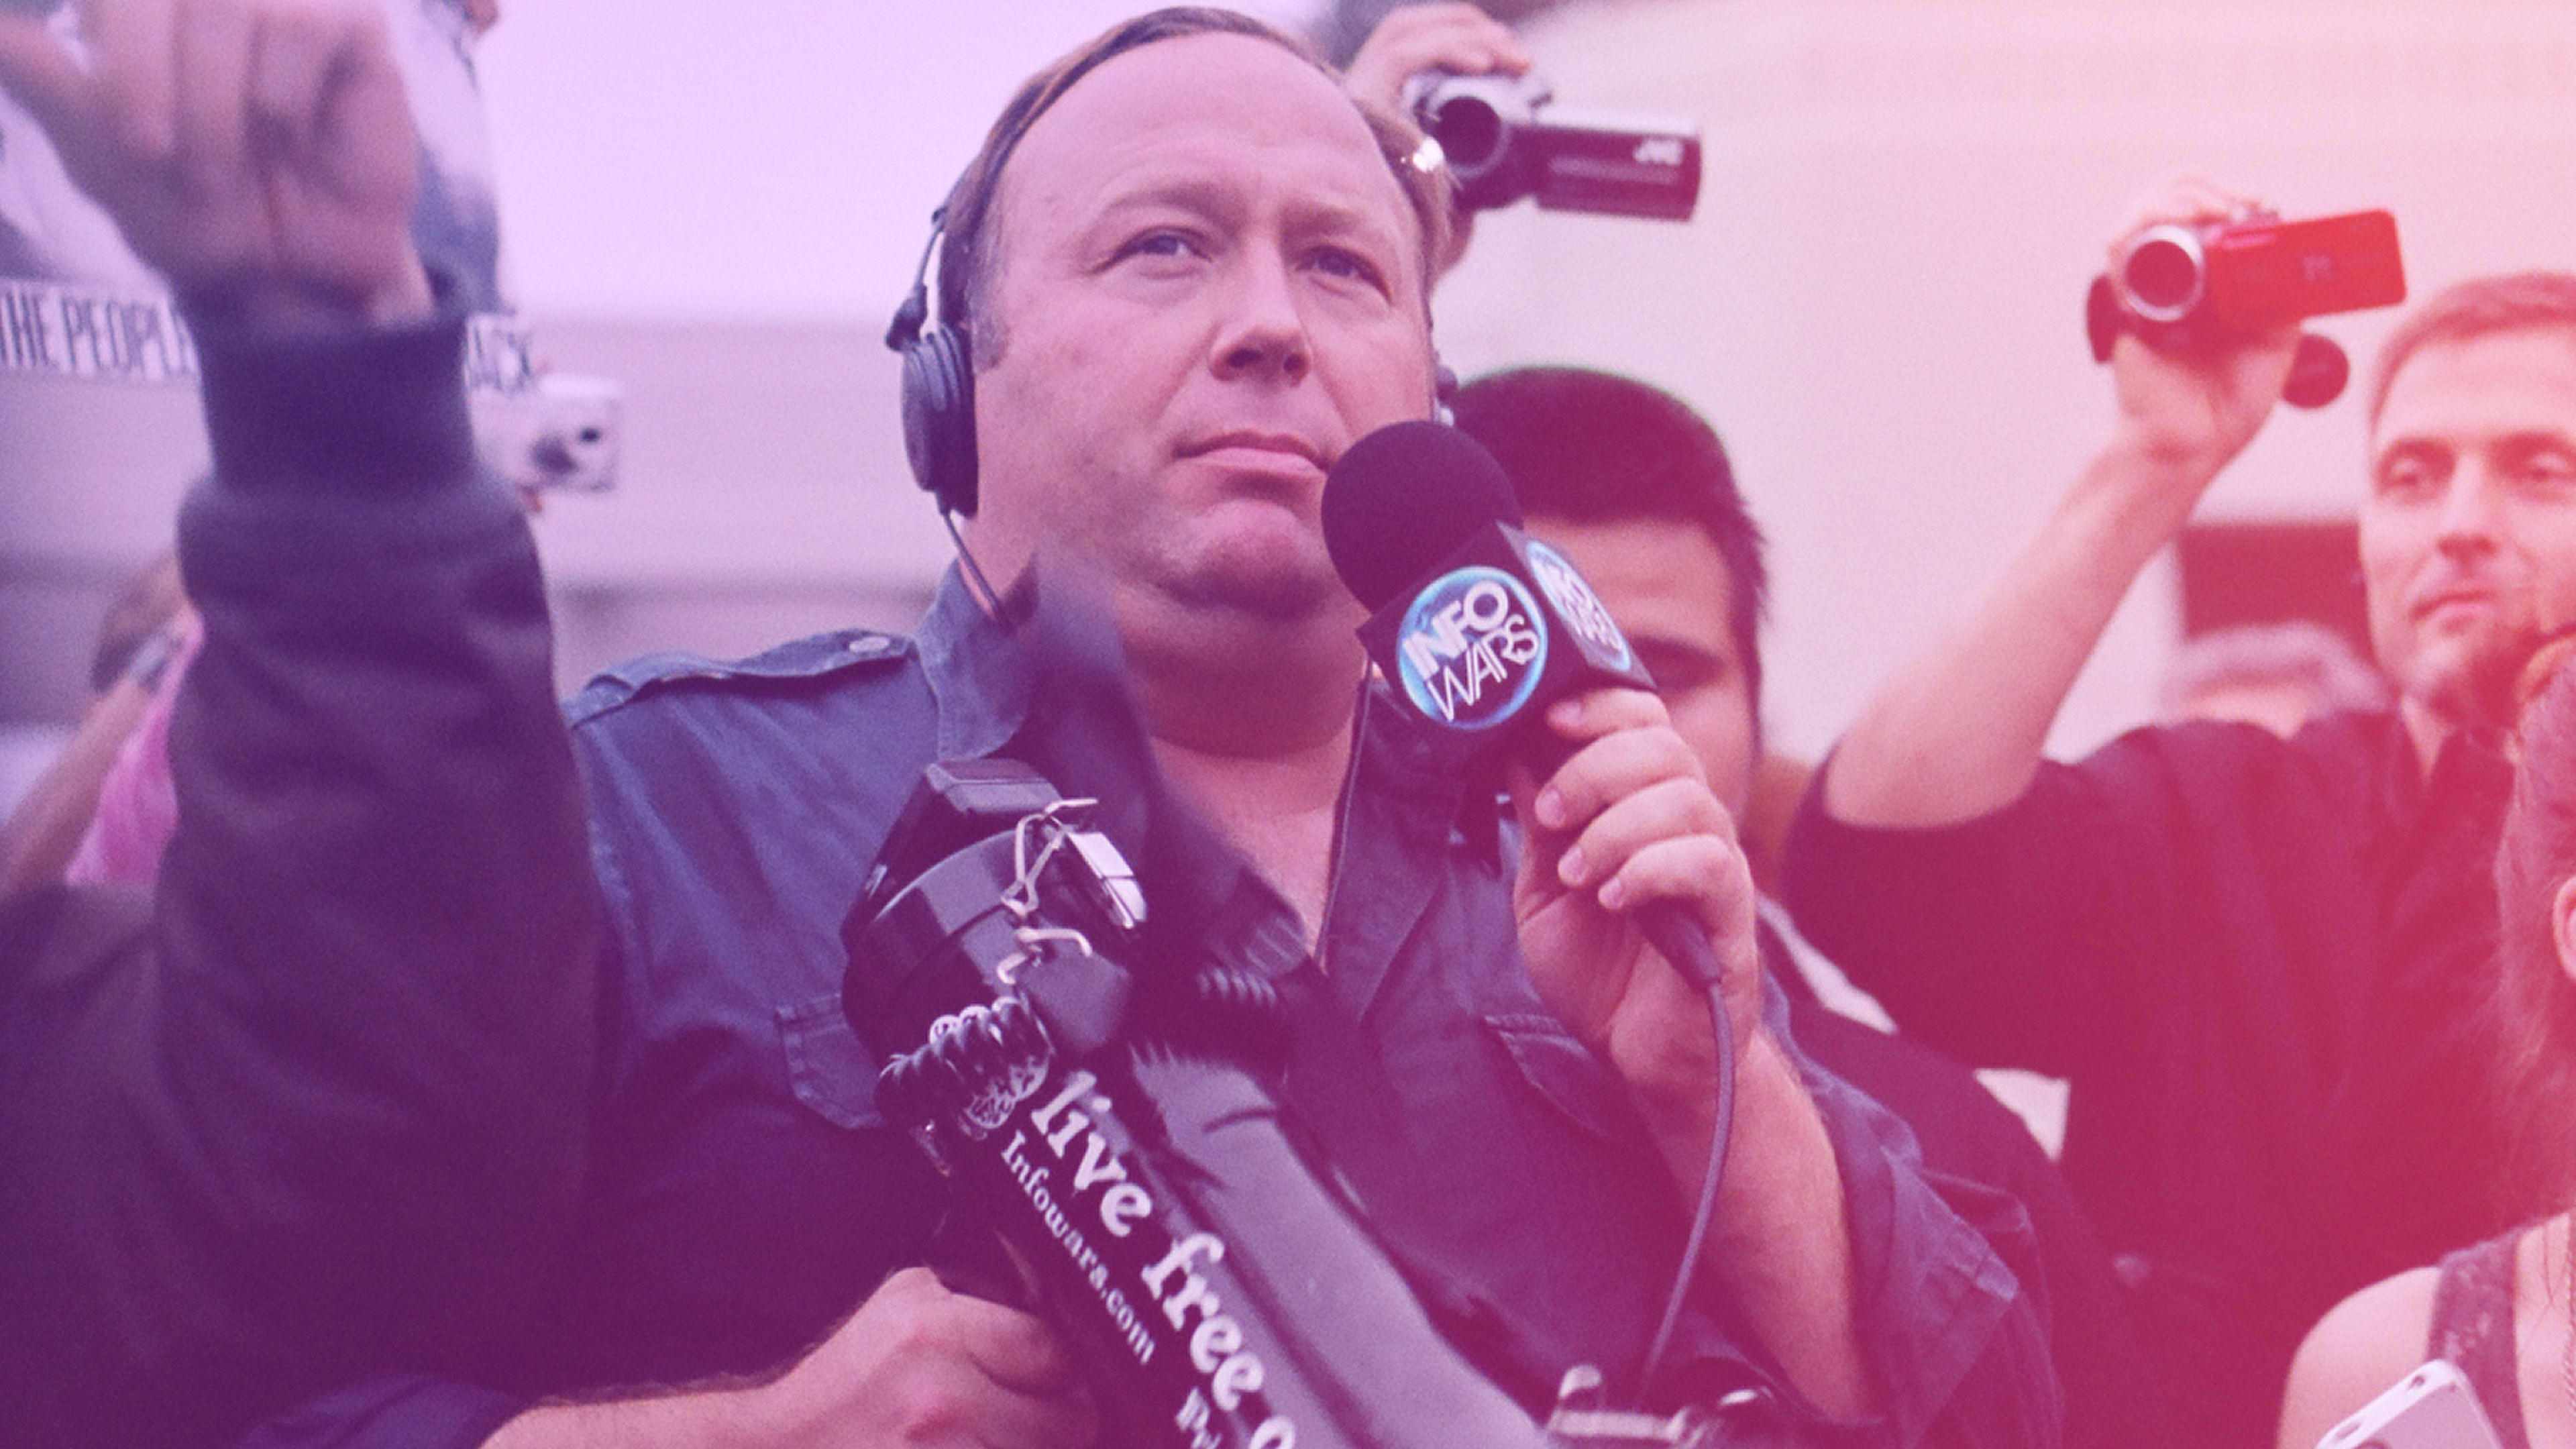 These InfoWars videos banned by YouTube are still alive on Facebook